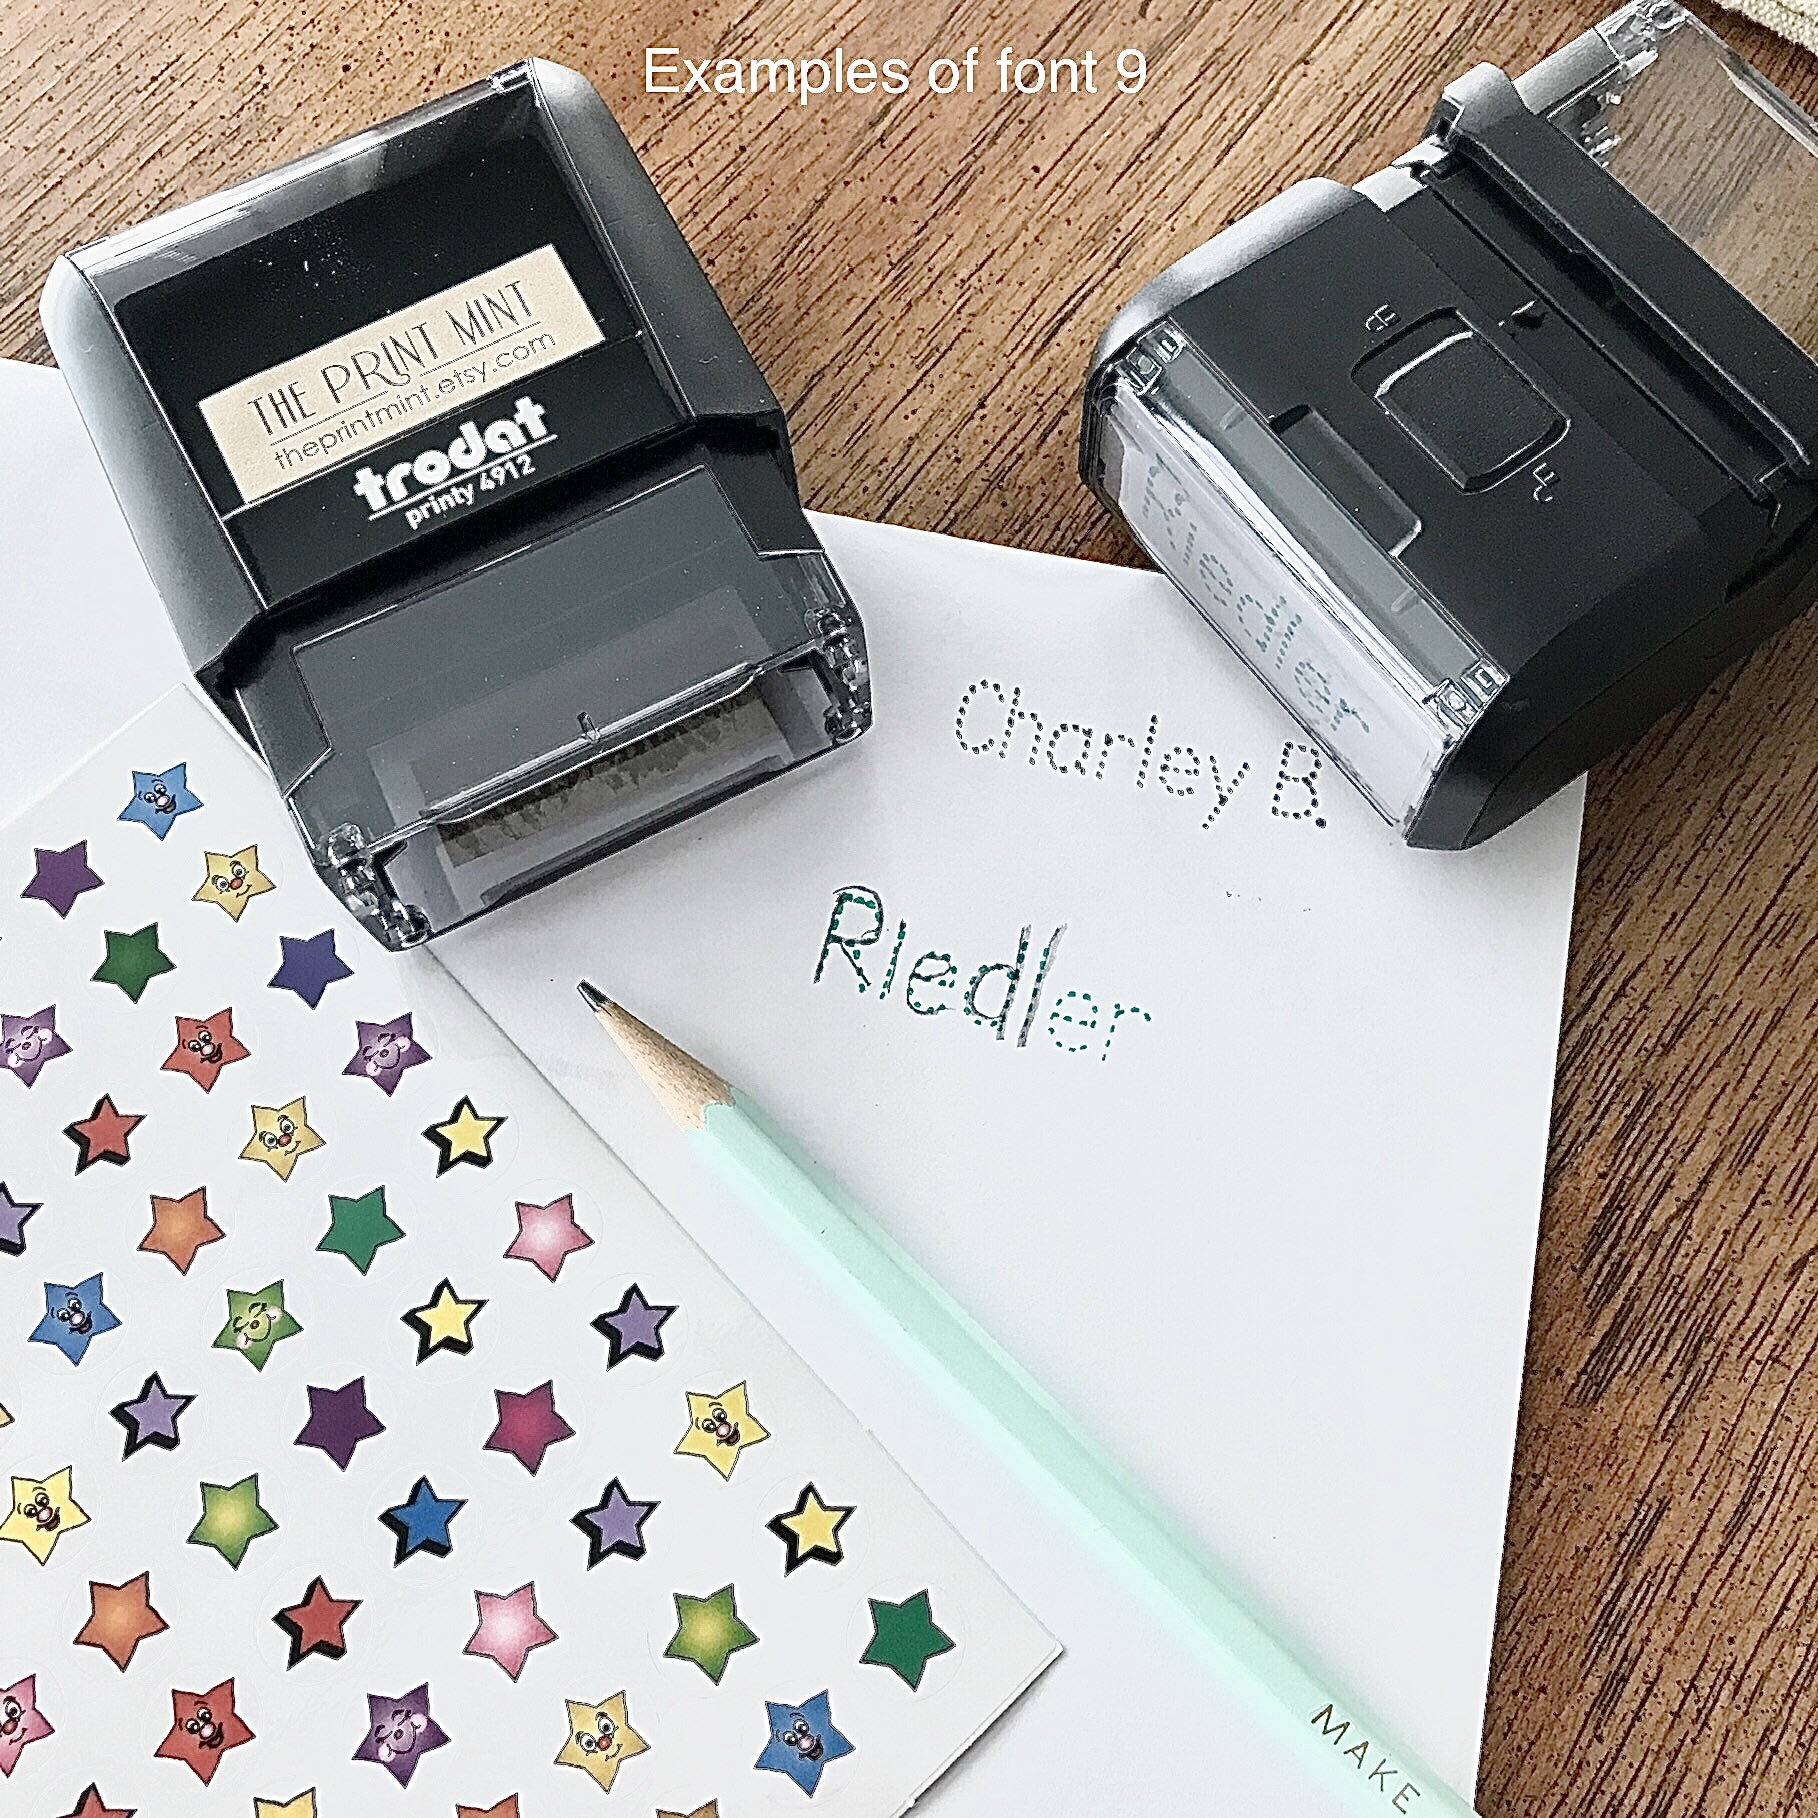 Custom Name Stamp Selfing inking Personalized Letter - Temu